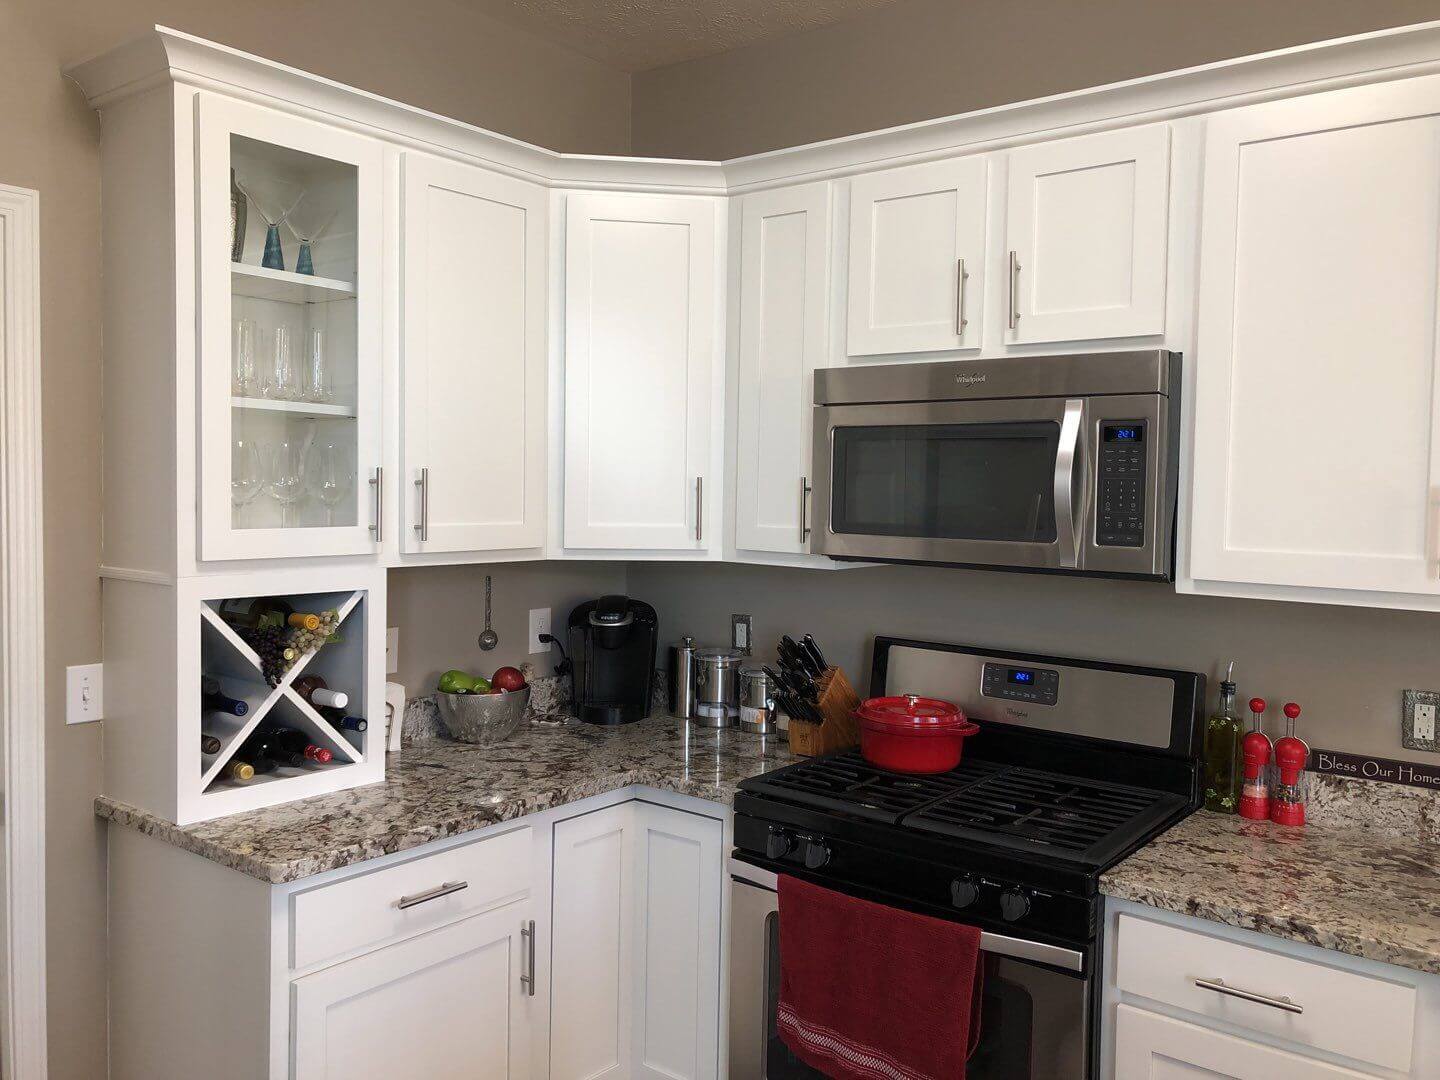 Kitchen Cabinets Painted White